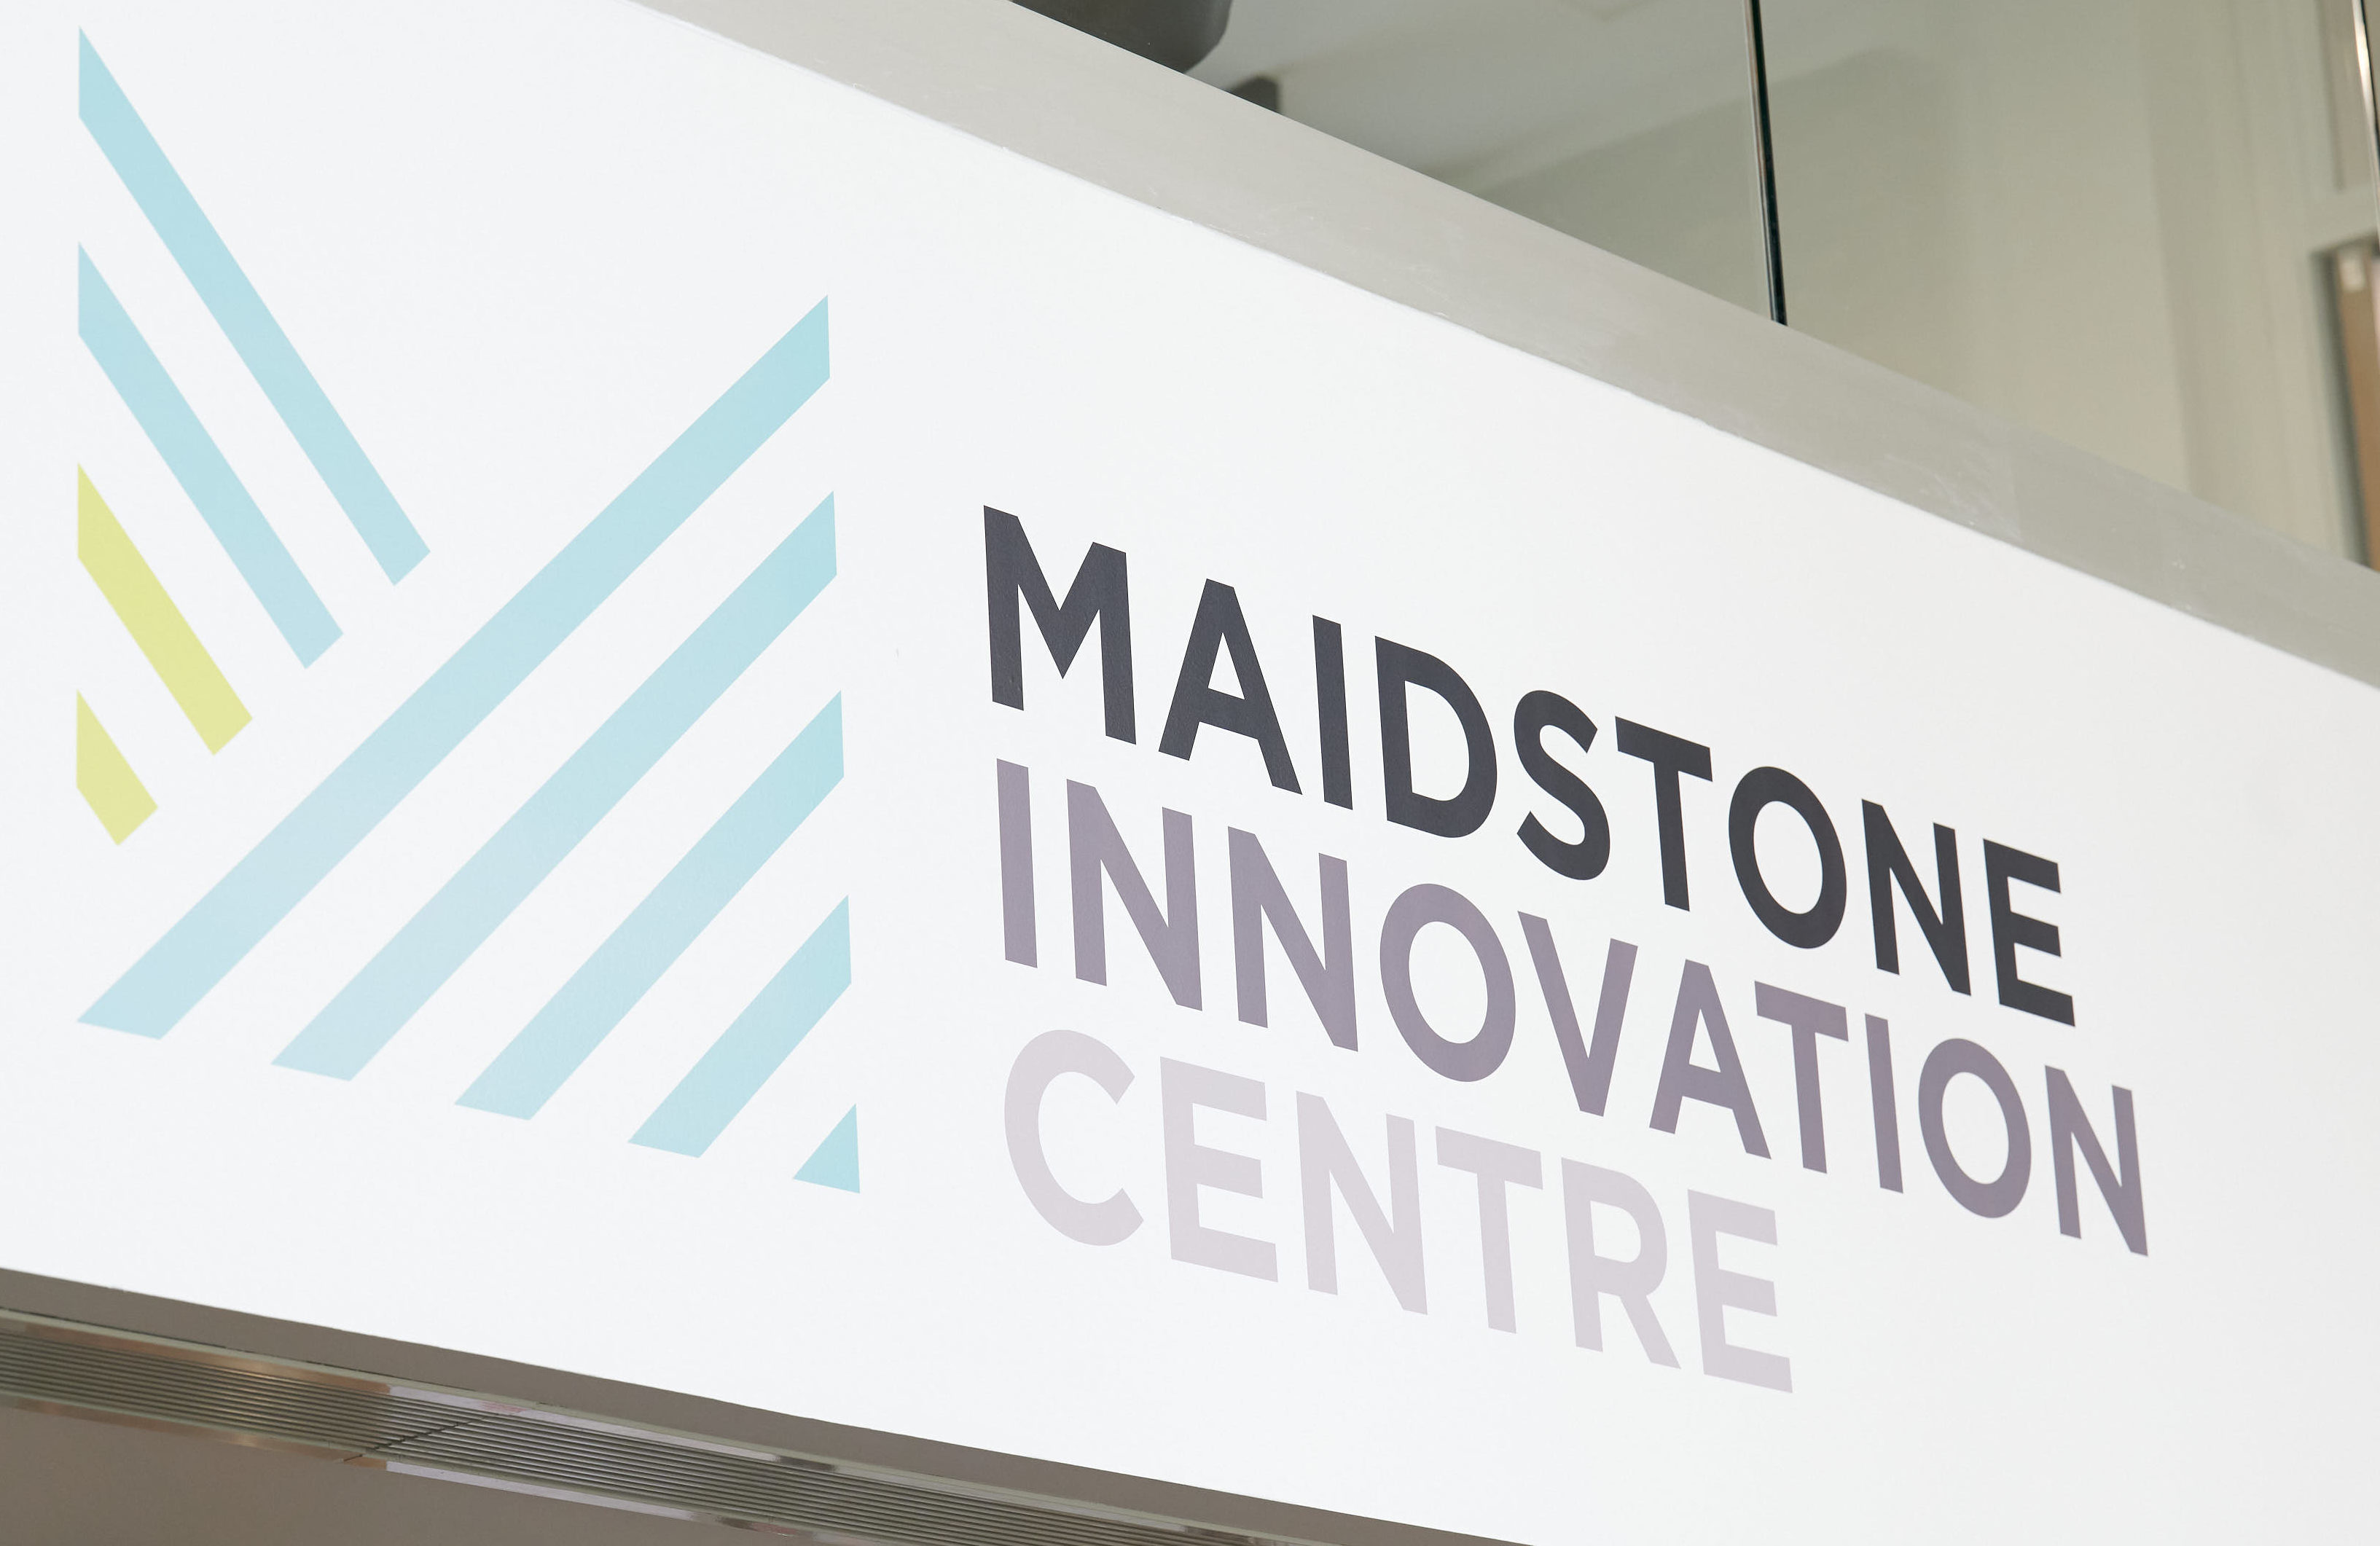 Virtual offices - Maidstone Innovation Centre